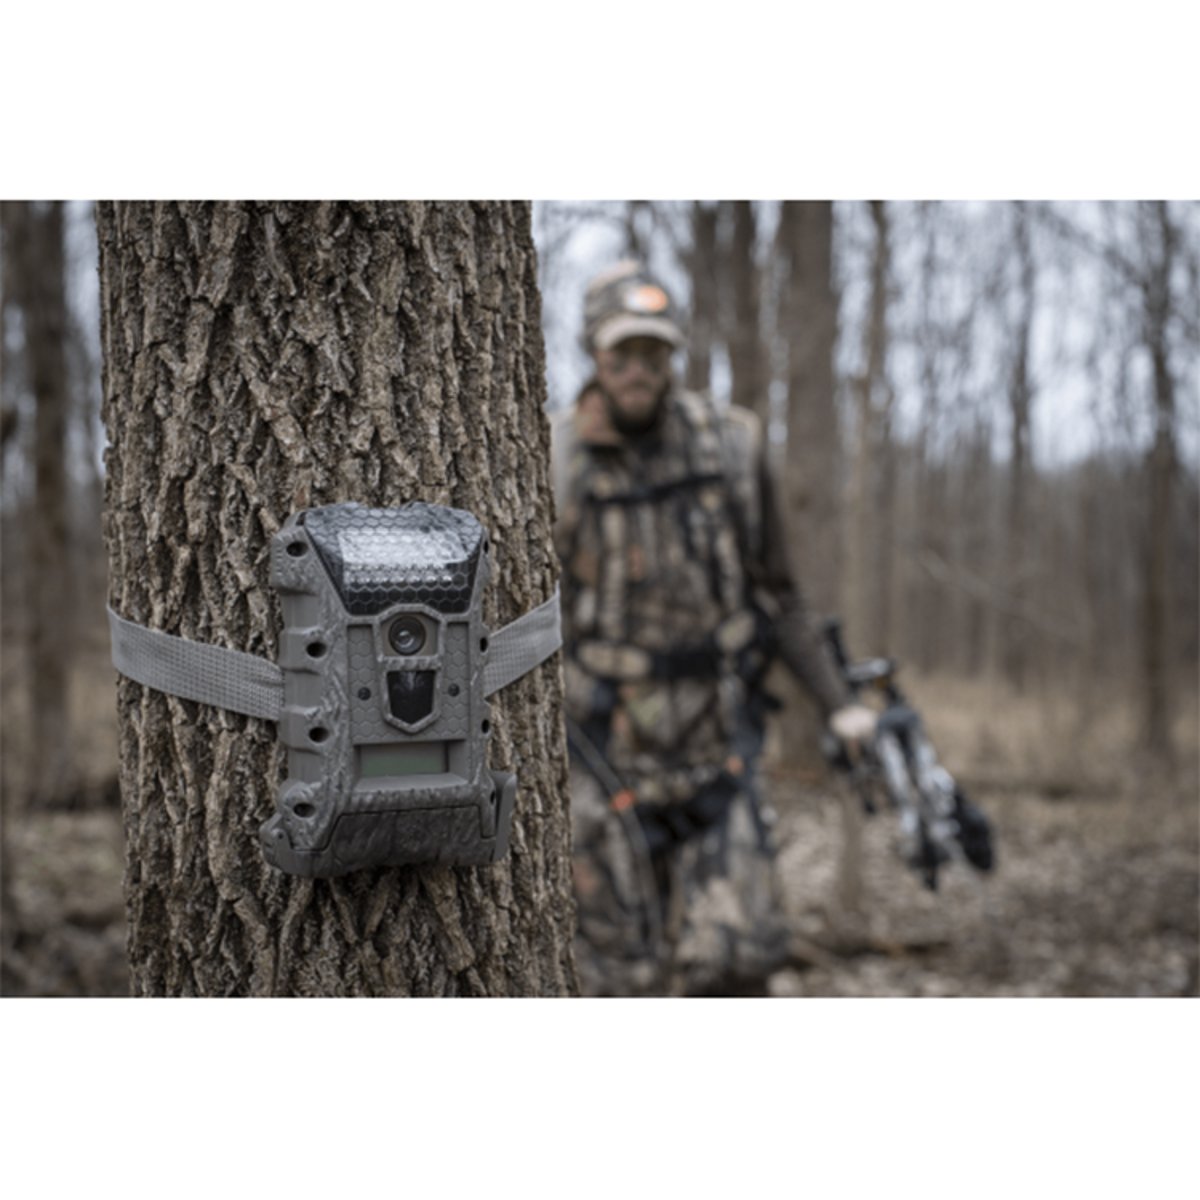 Wildgame Innovations Cloak Pro 16MP Trail & Game Camera 8X AA Batteries Included 